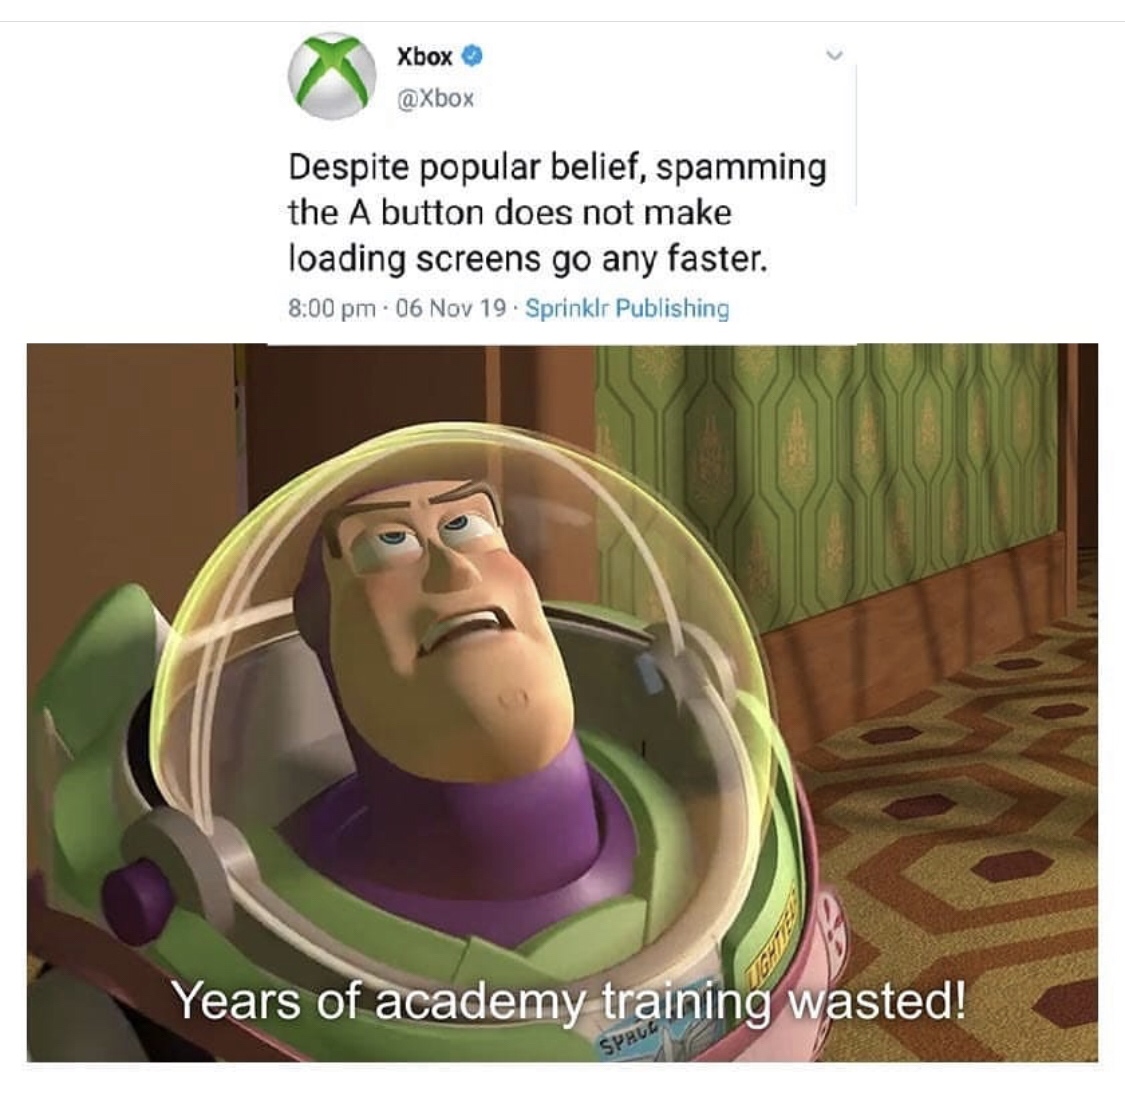 tool fear inoculum meme - Xbox Despite popular belief, spamming the A button does not make loading screens go any faster. . 06 Nov 19. Sprinklr Publishing Years of academy training wasted! Sprur